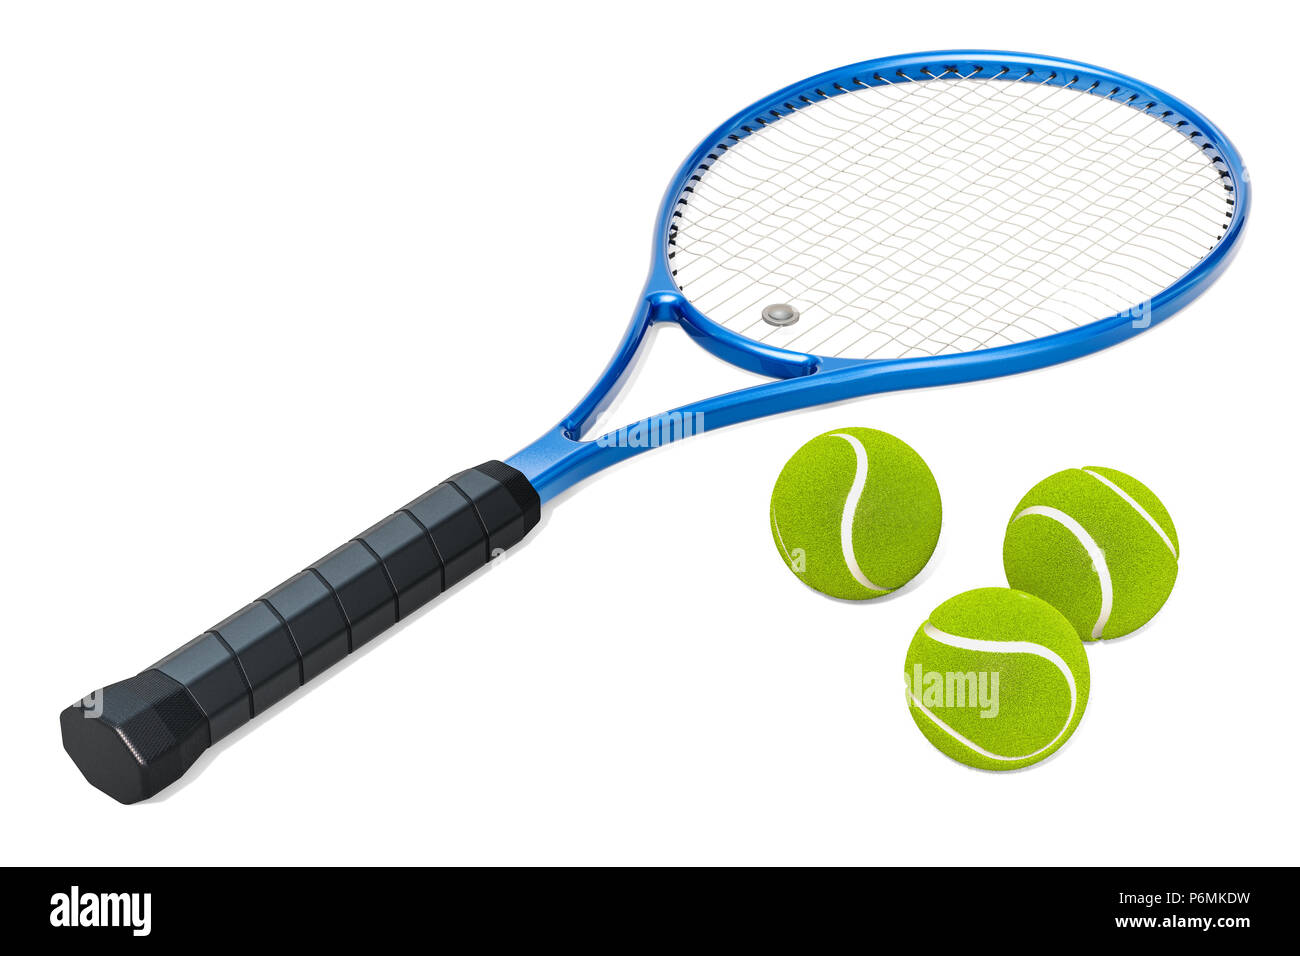 Tennis racket and balls, 3D rendering isolated on white background Stock Photo